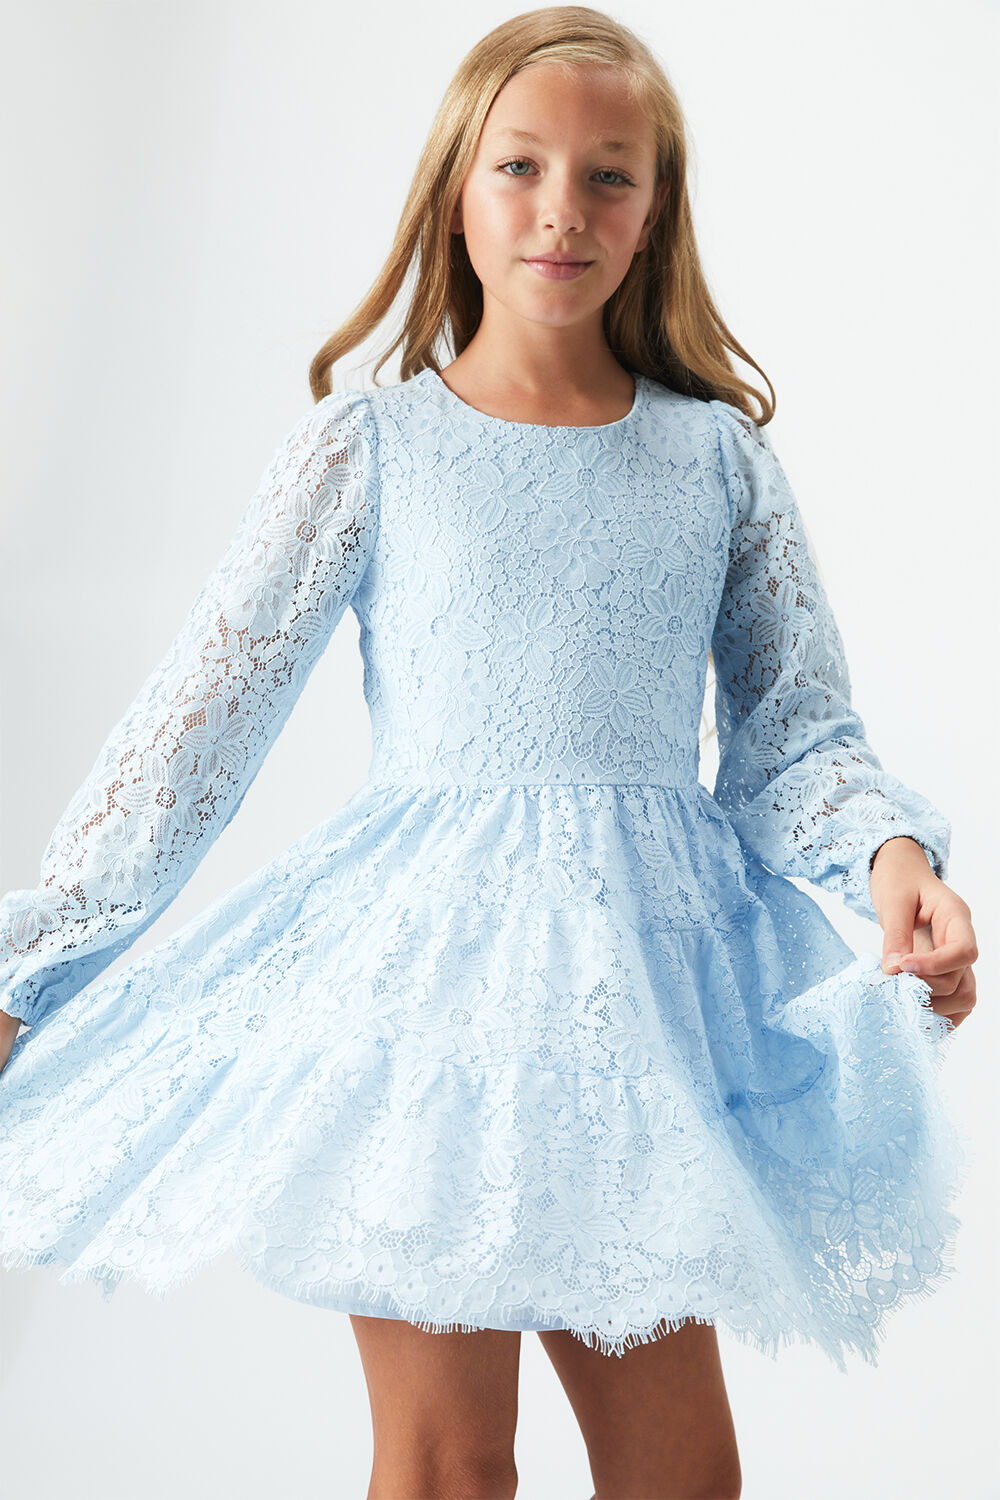 SIENNA TIERED LACE DRESS in colour CROWN BLUE